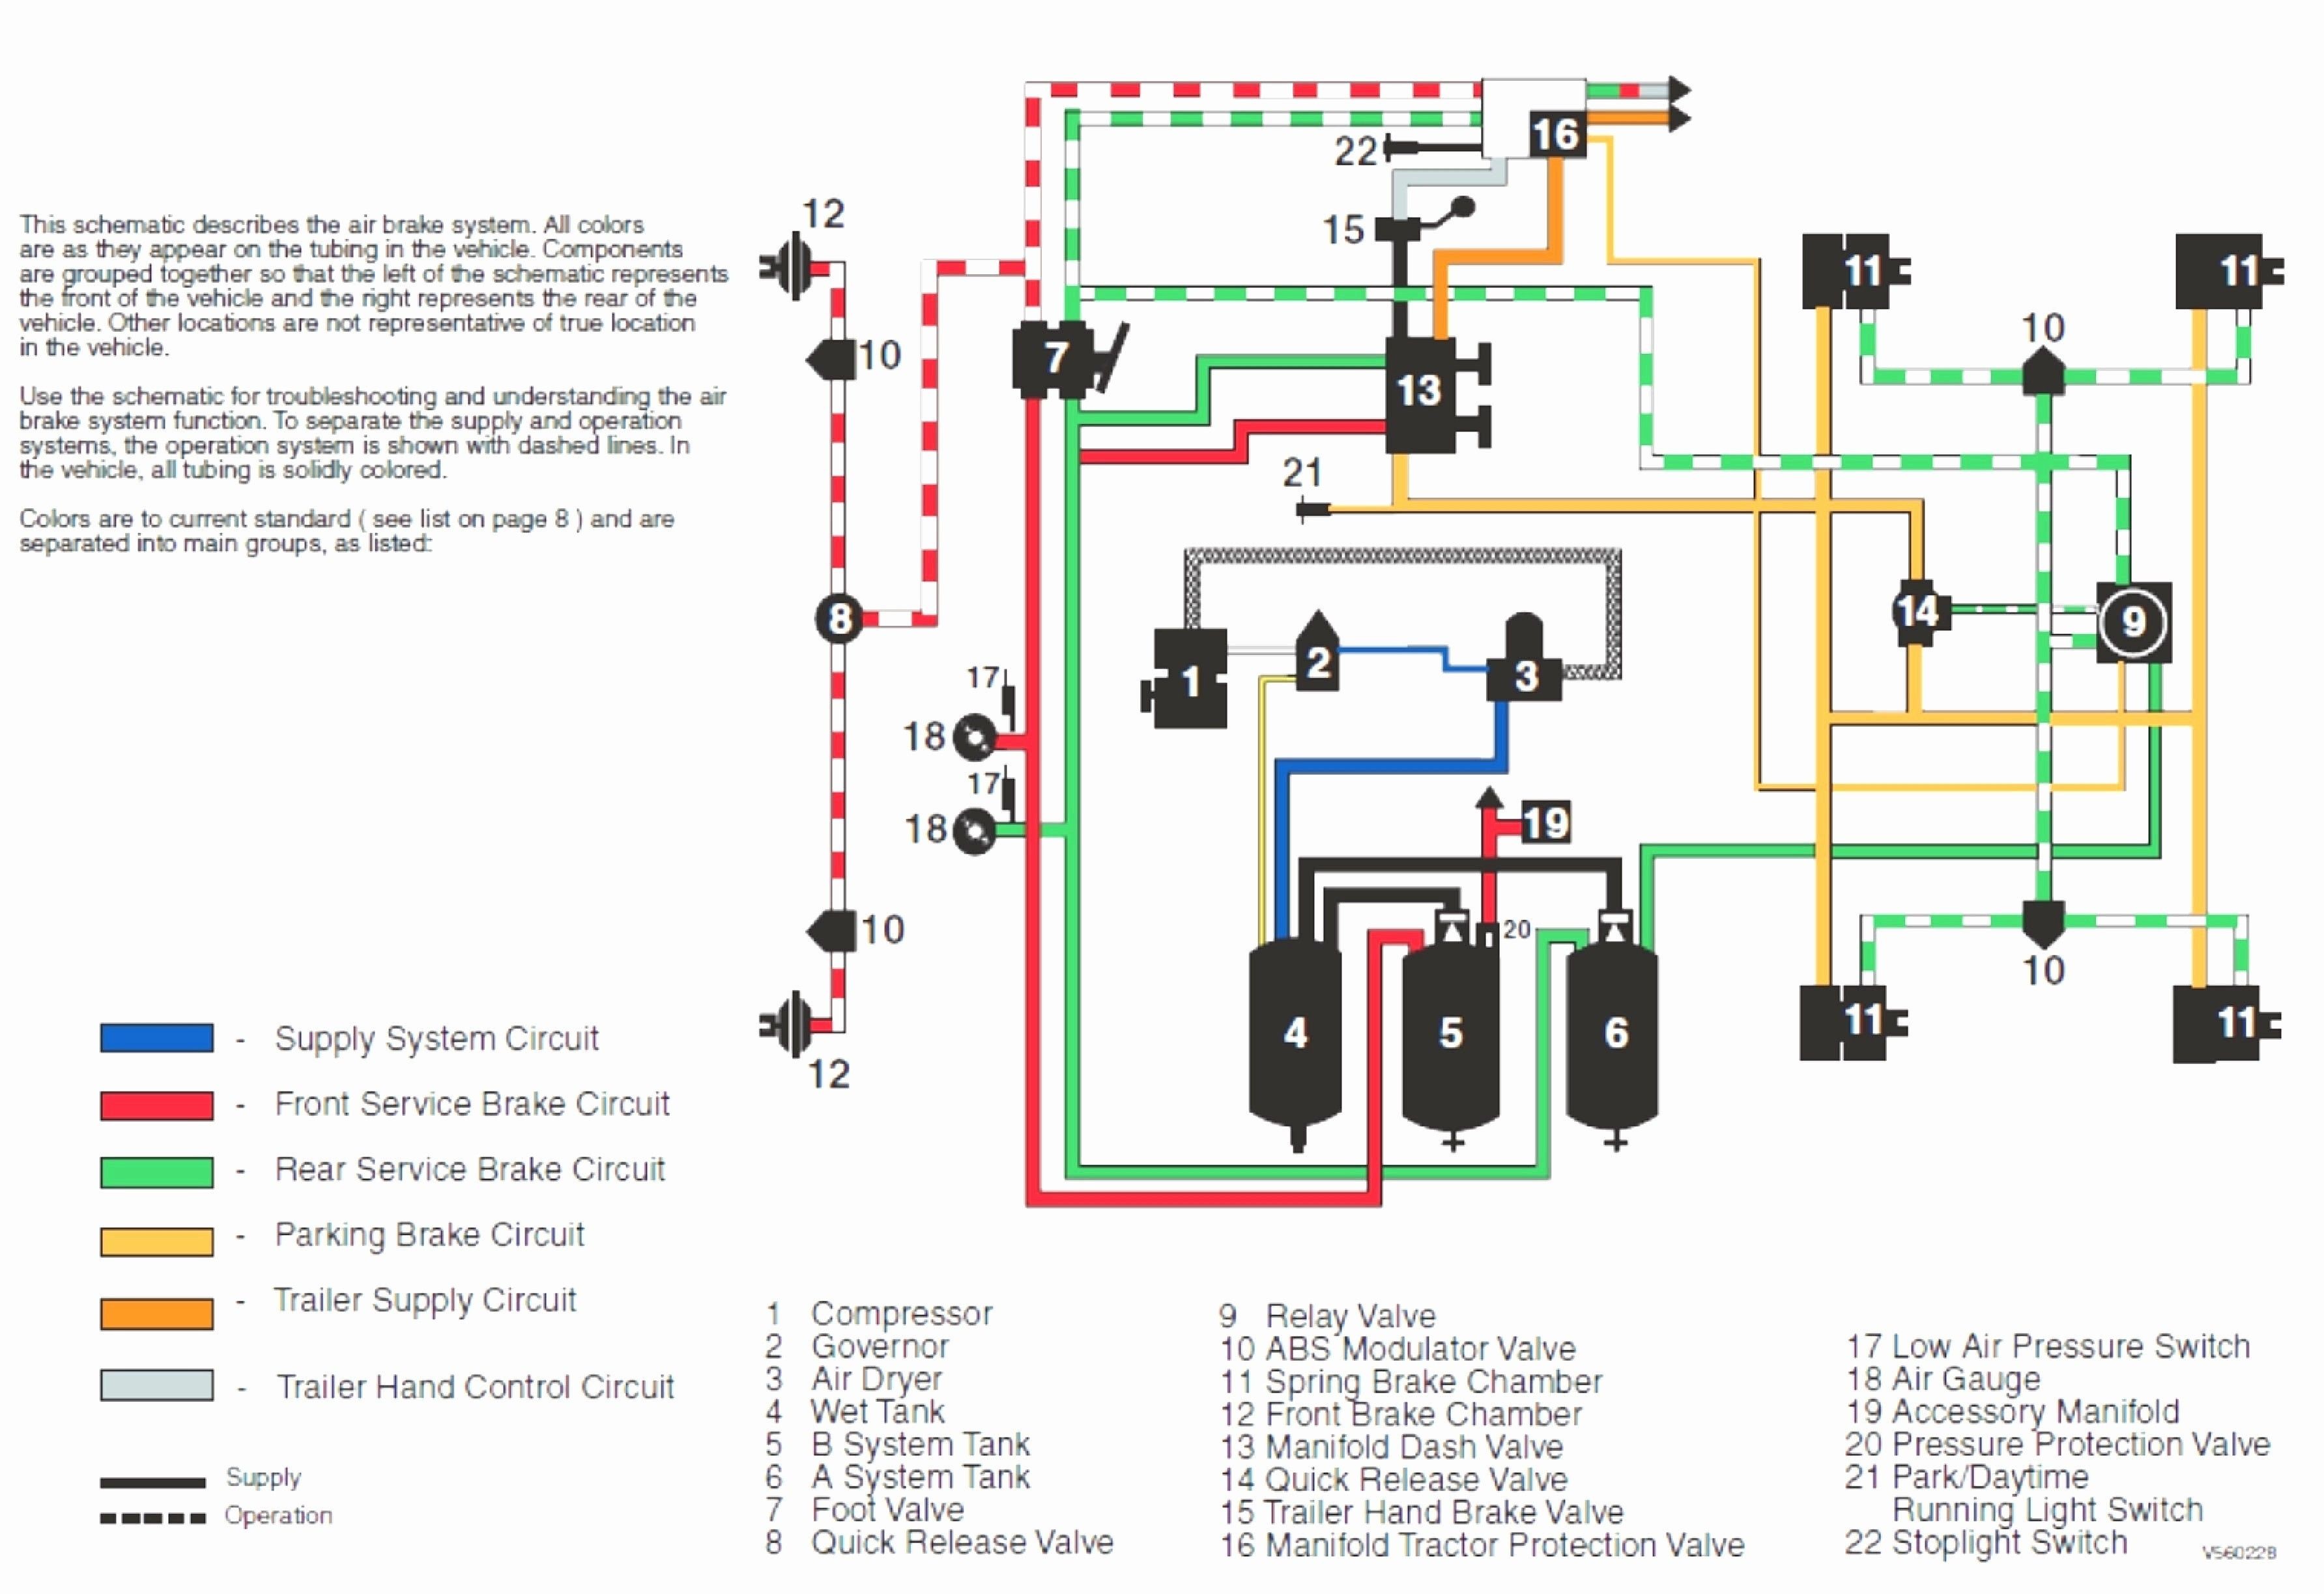 Wiring A 3 Prong Flasher Relay Best Wiring Diagram for Daytime Running Lights Diagrams Of Wiring A 3 Prong Flasher Relay